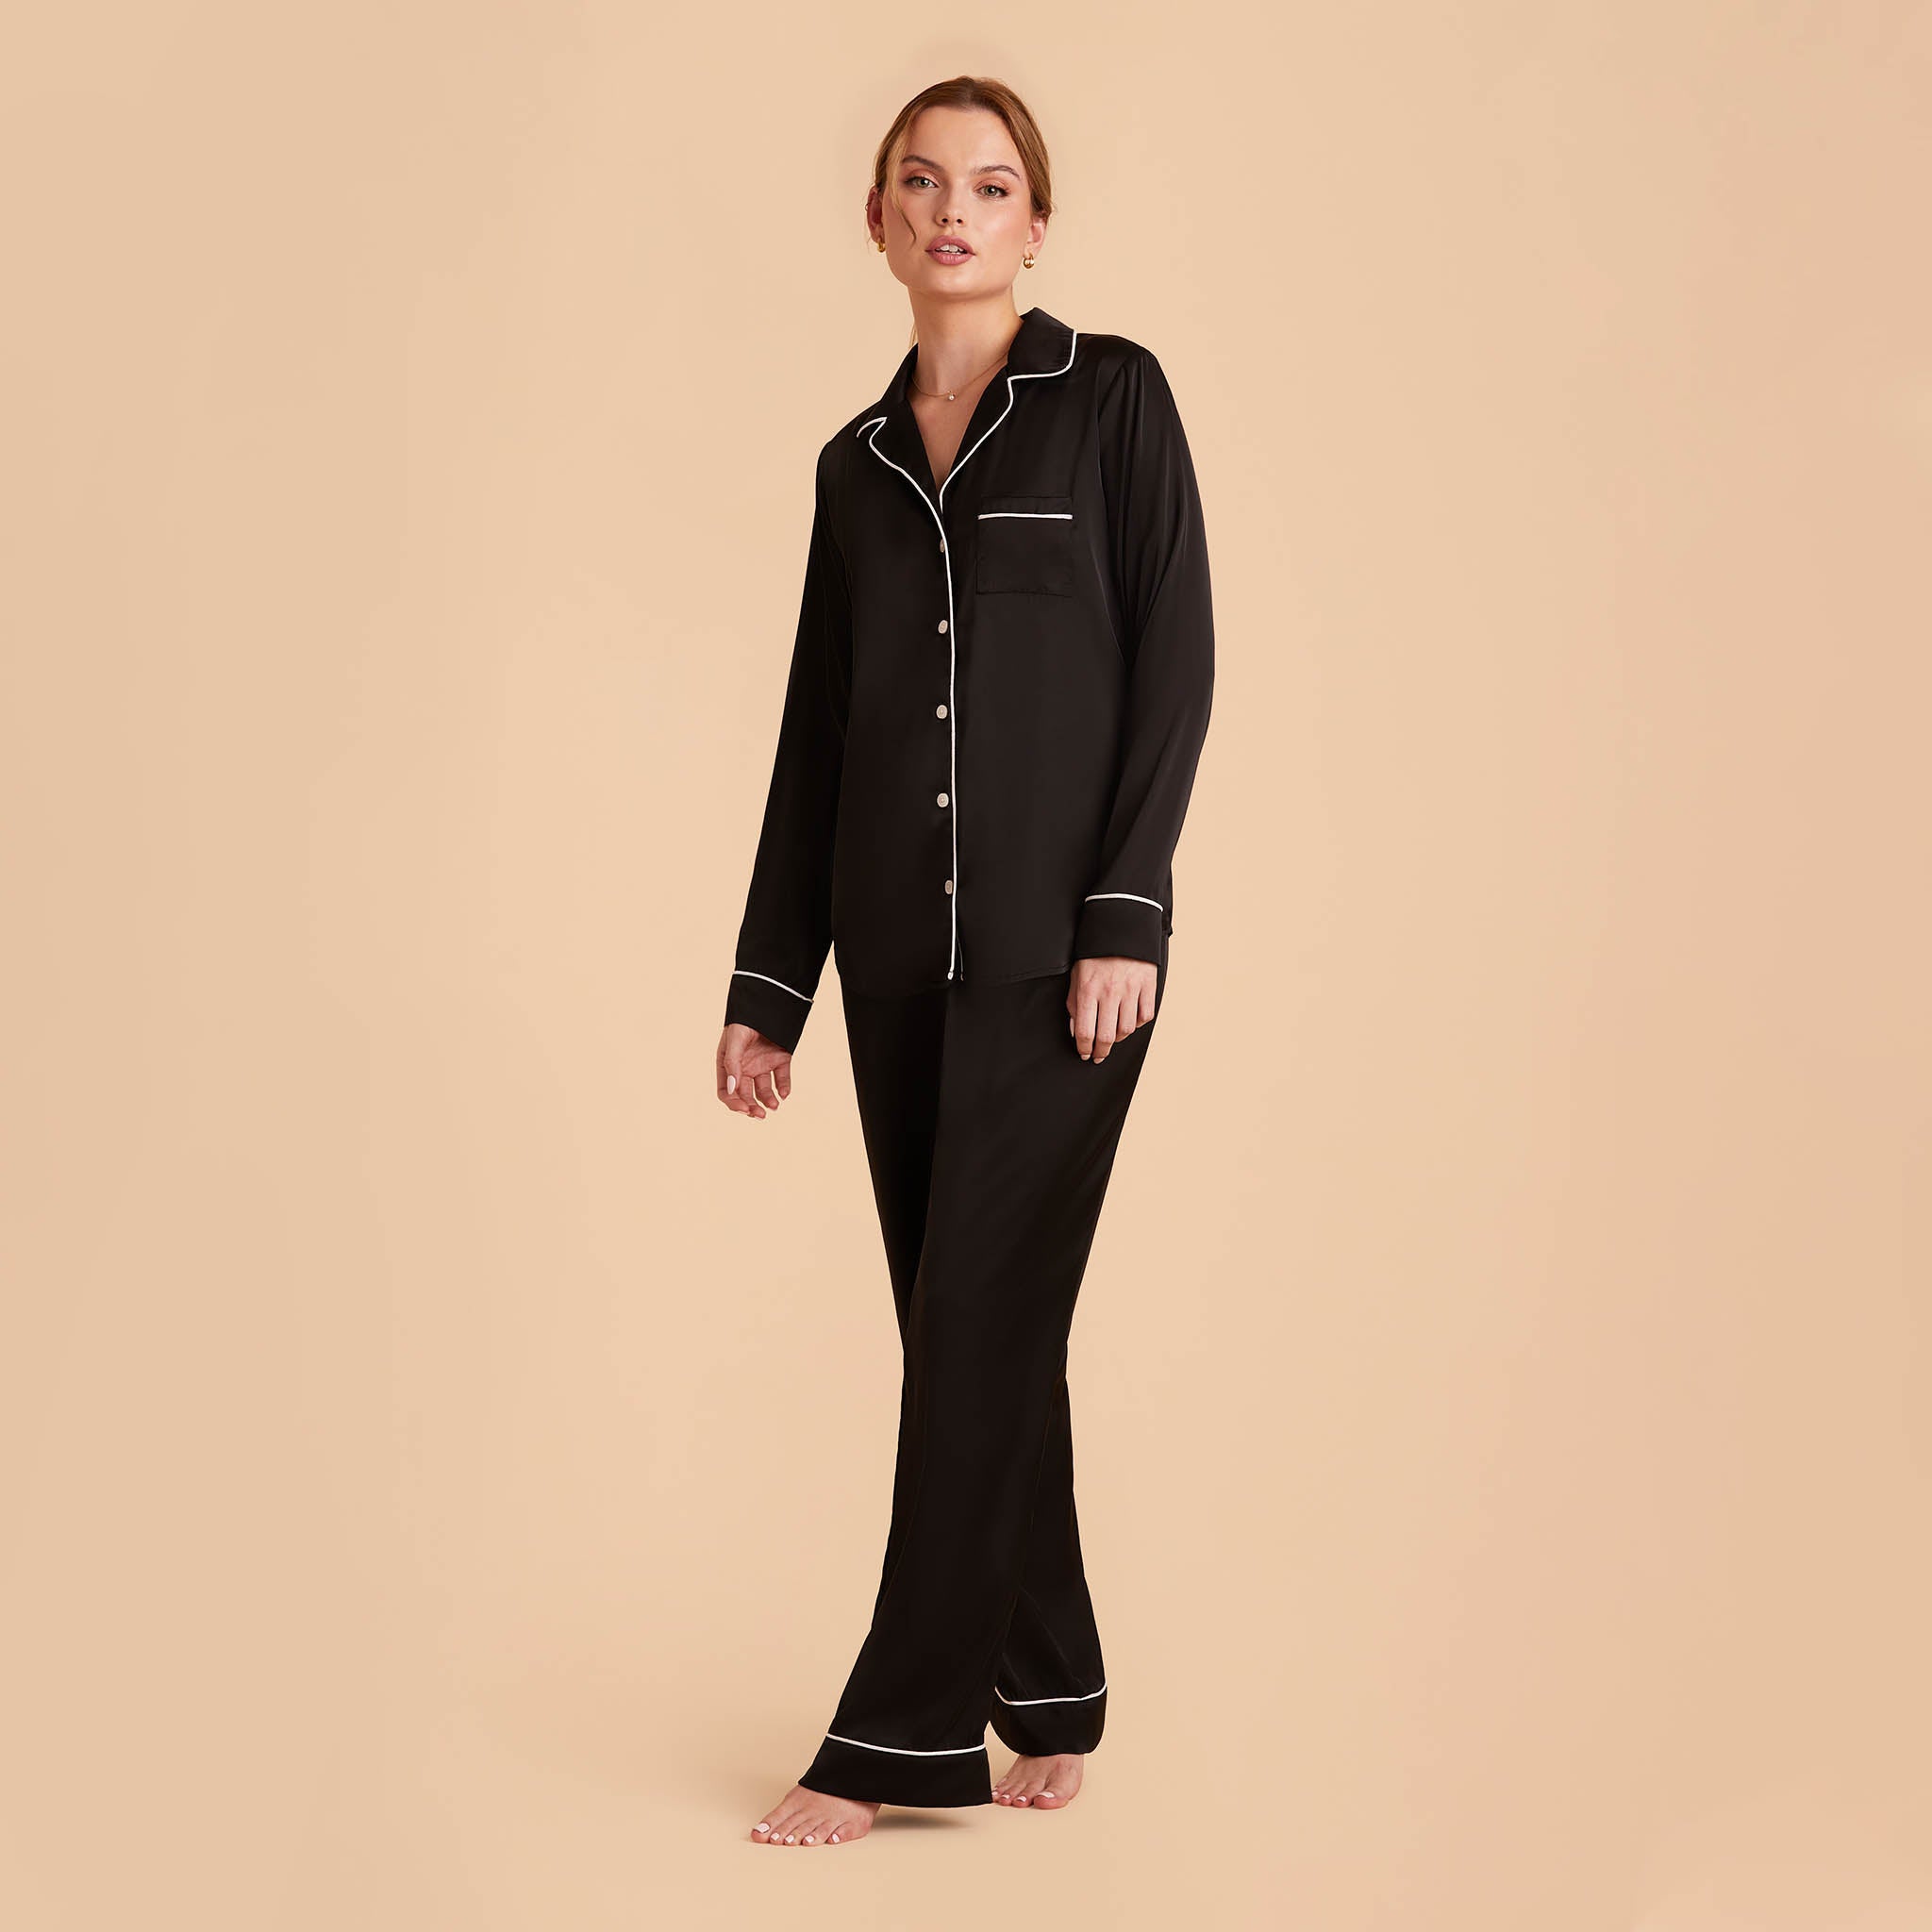 Jonny Satin Long Sleeve Pajama Top With White Piping in black, front view